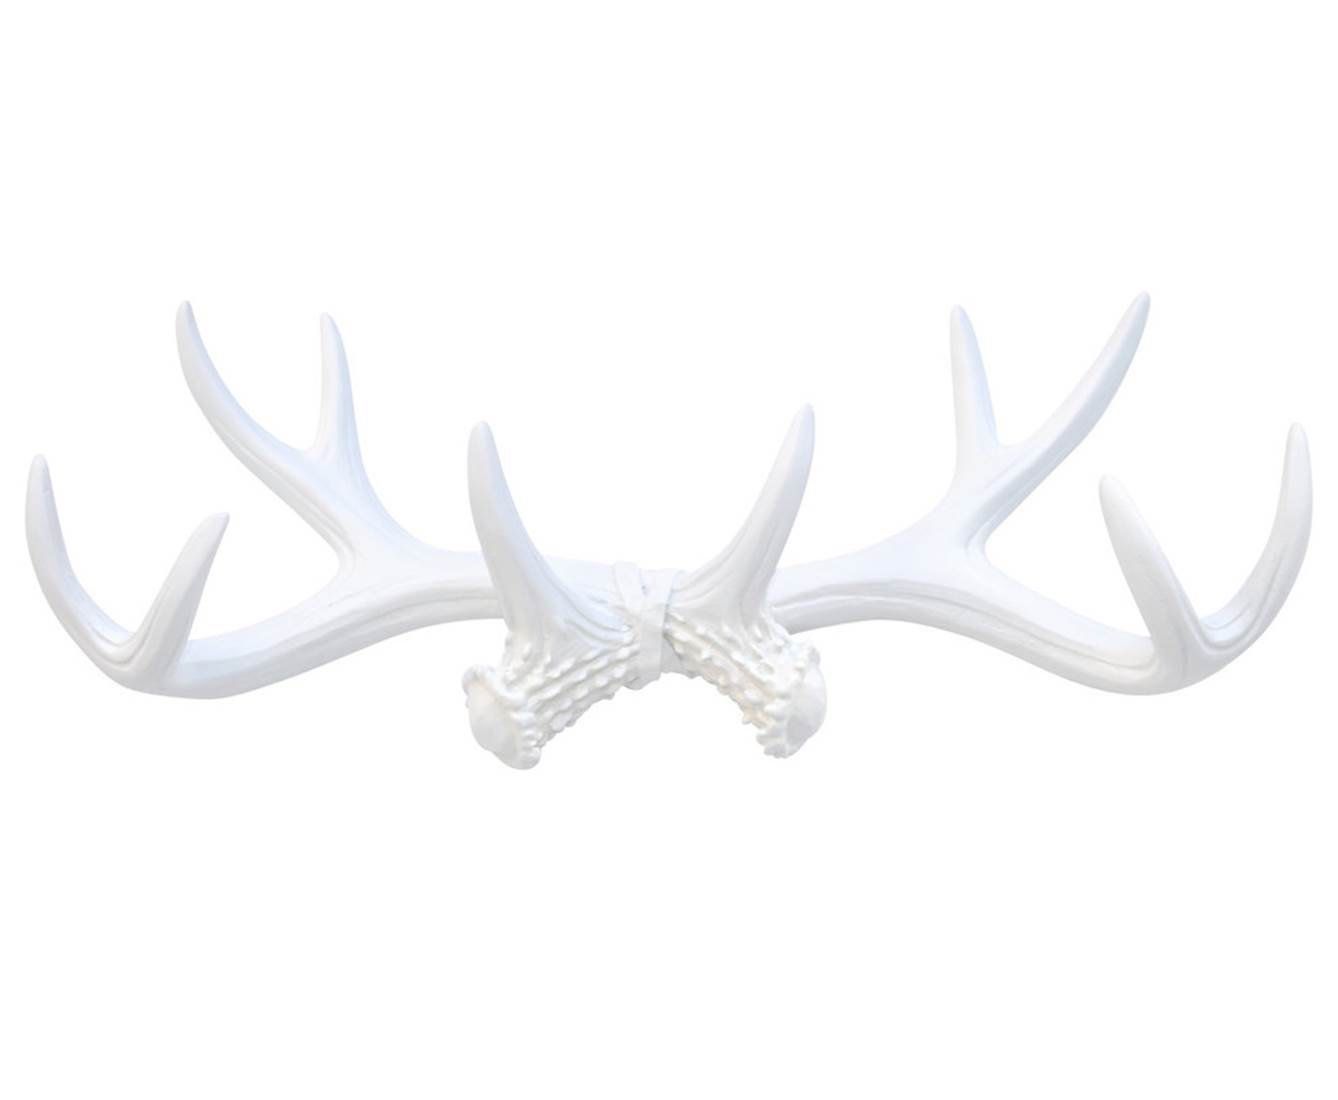 Faux Taxidermy Antler Wall Décor Intended For Highlands Ranch The Templeton Wall Decor (View 8 of 30)